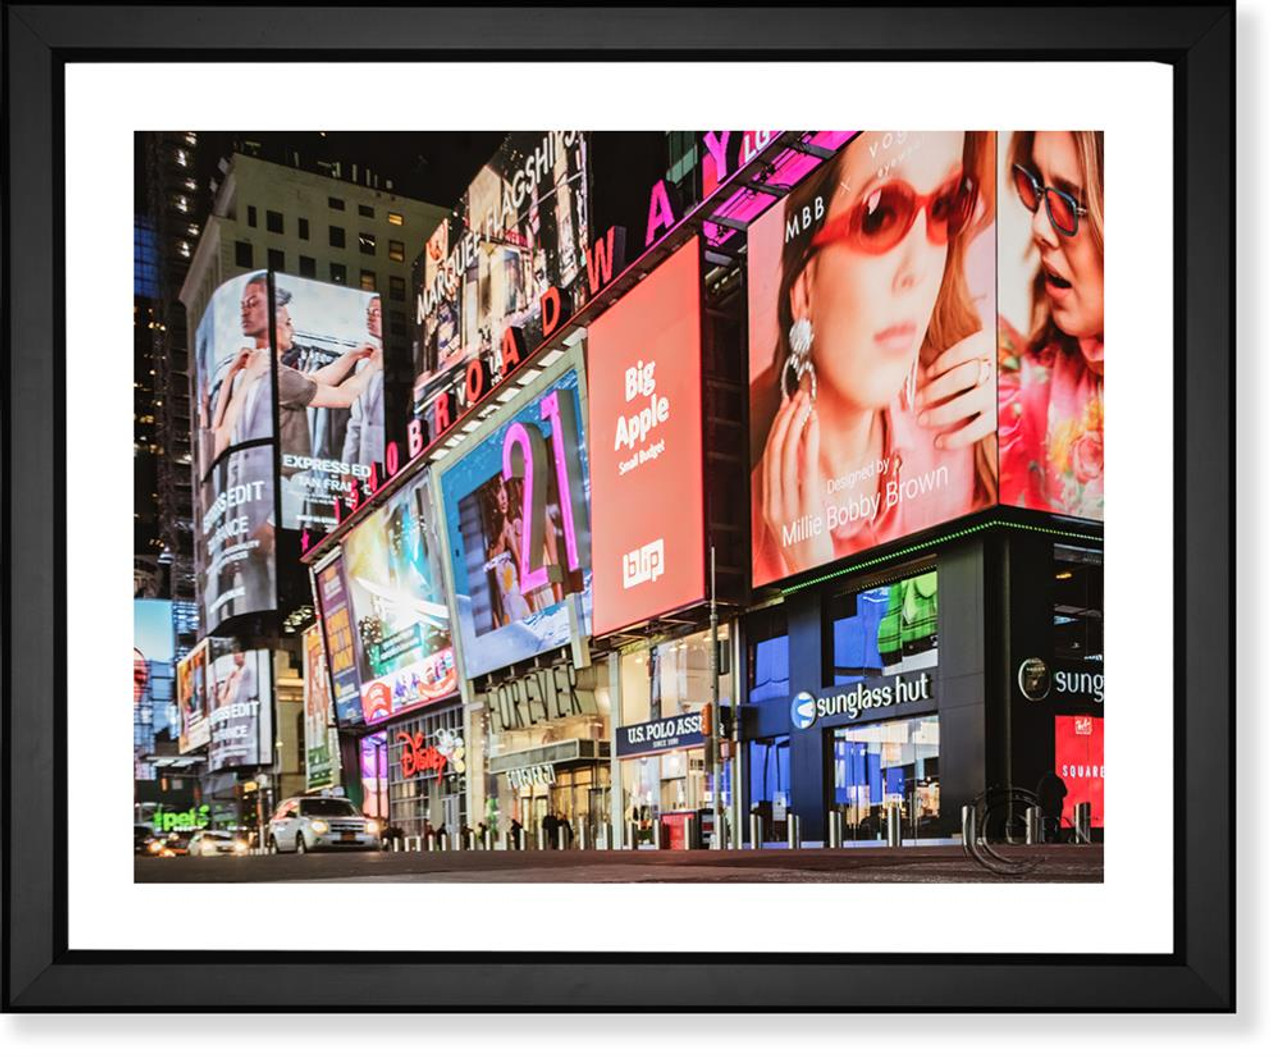 Times Square in New York City - 1540 Broadway - Disney Store - Forever 21  Metal Print